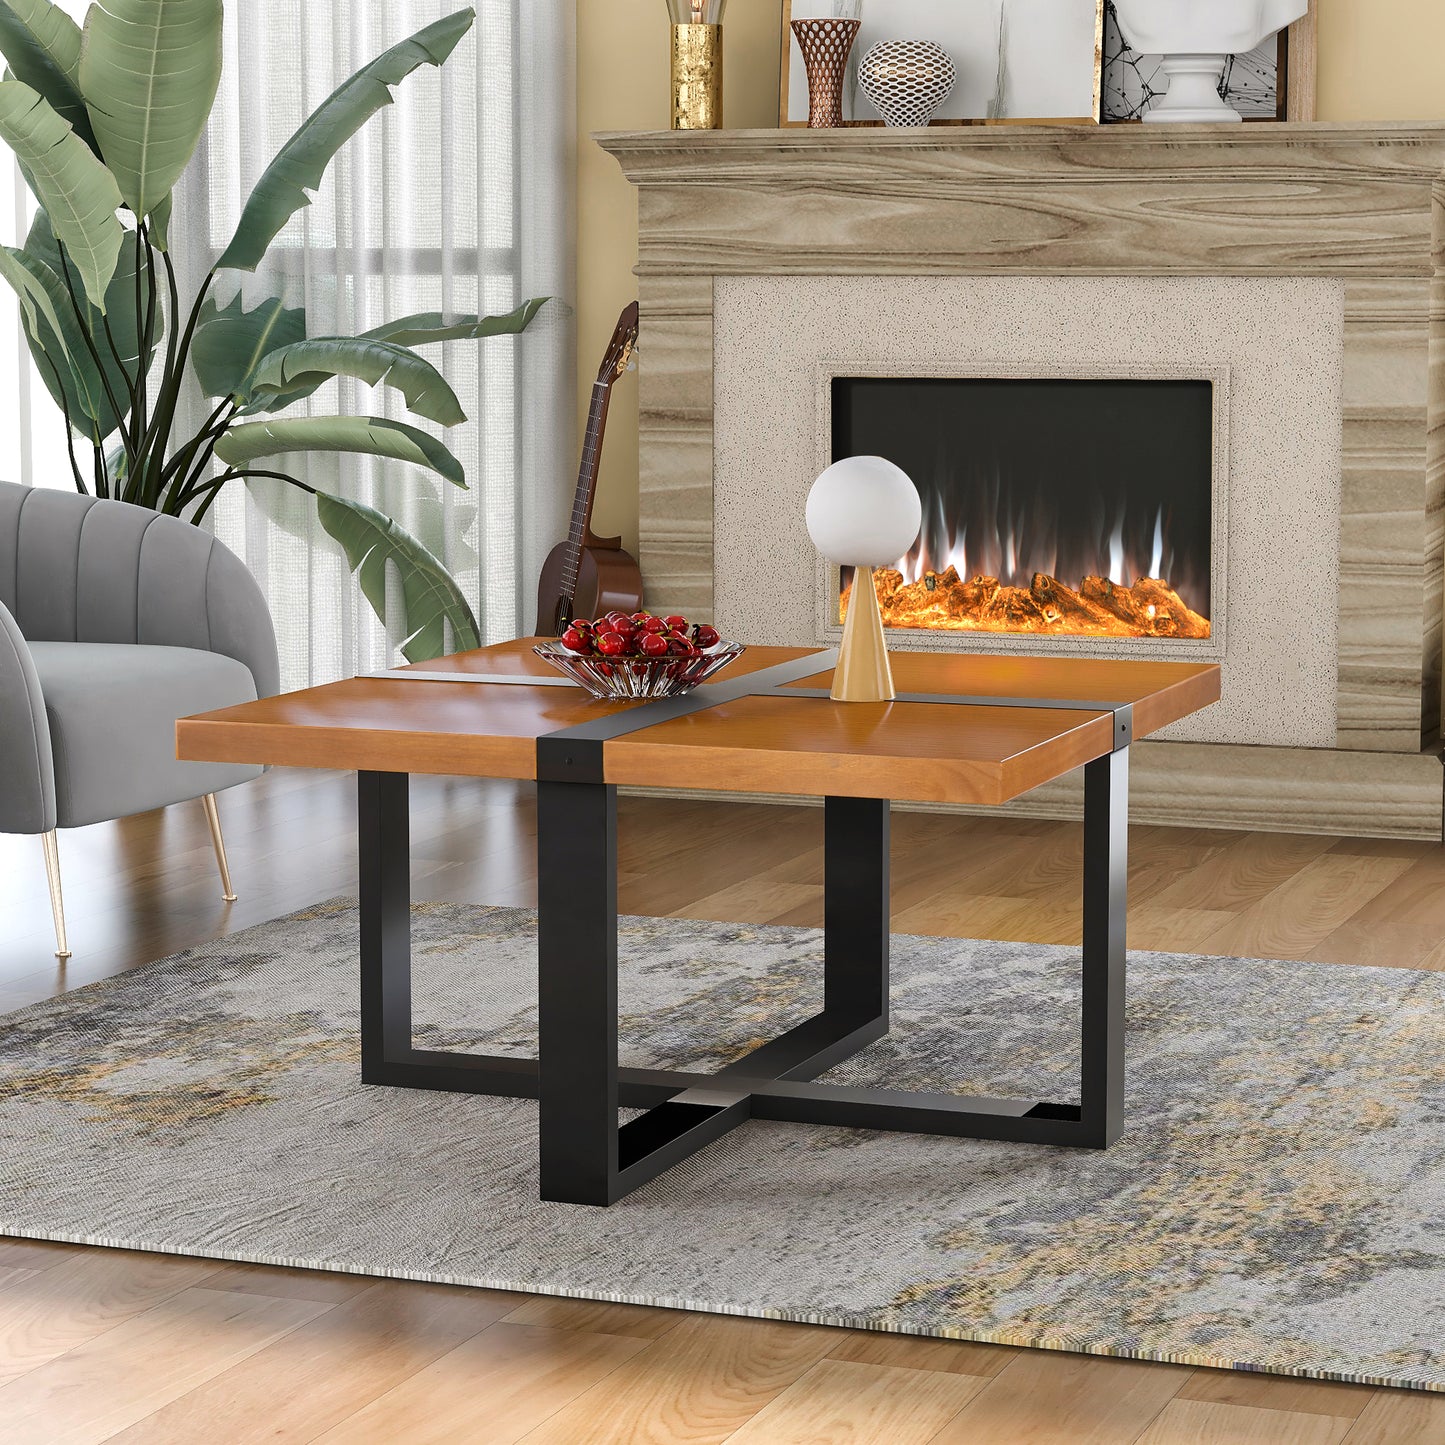 U-style Coffee Table With Crossed-shape Table Top and Wood Legs,37.4 Inch